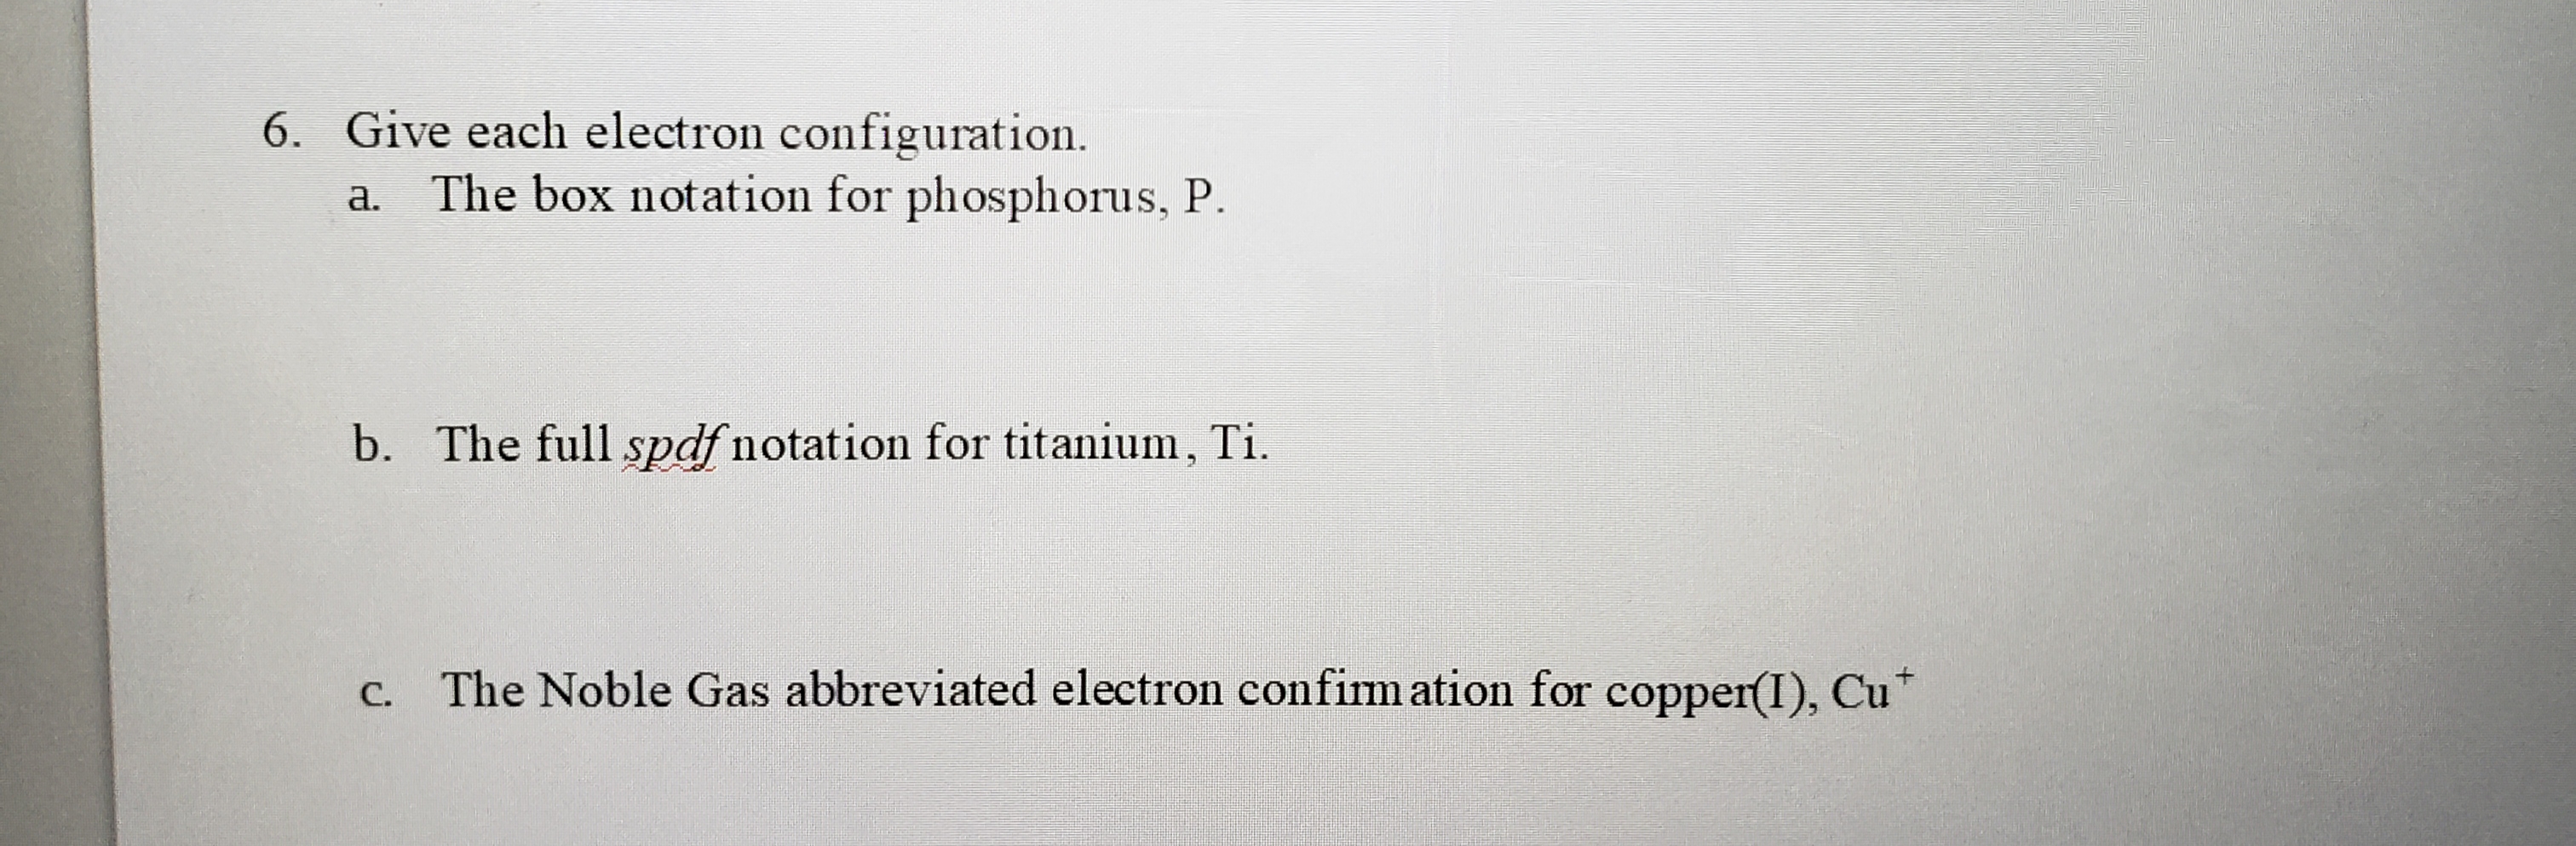 Give each electron configuration.
a. The box notation for phosphorus, P.
b. The full spdf notation for titanium, Ti.
c. The Noble Gas abbreviated electron confinmation for copper(I), Cu*
